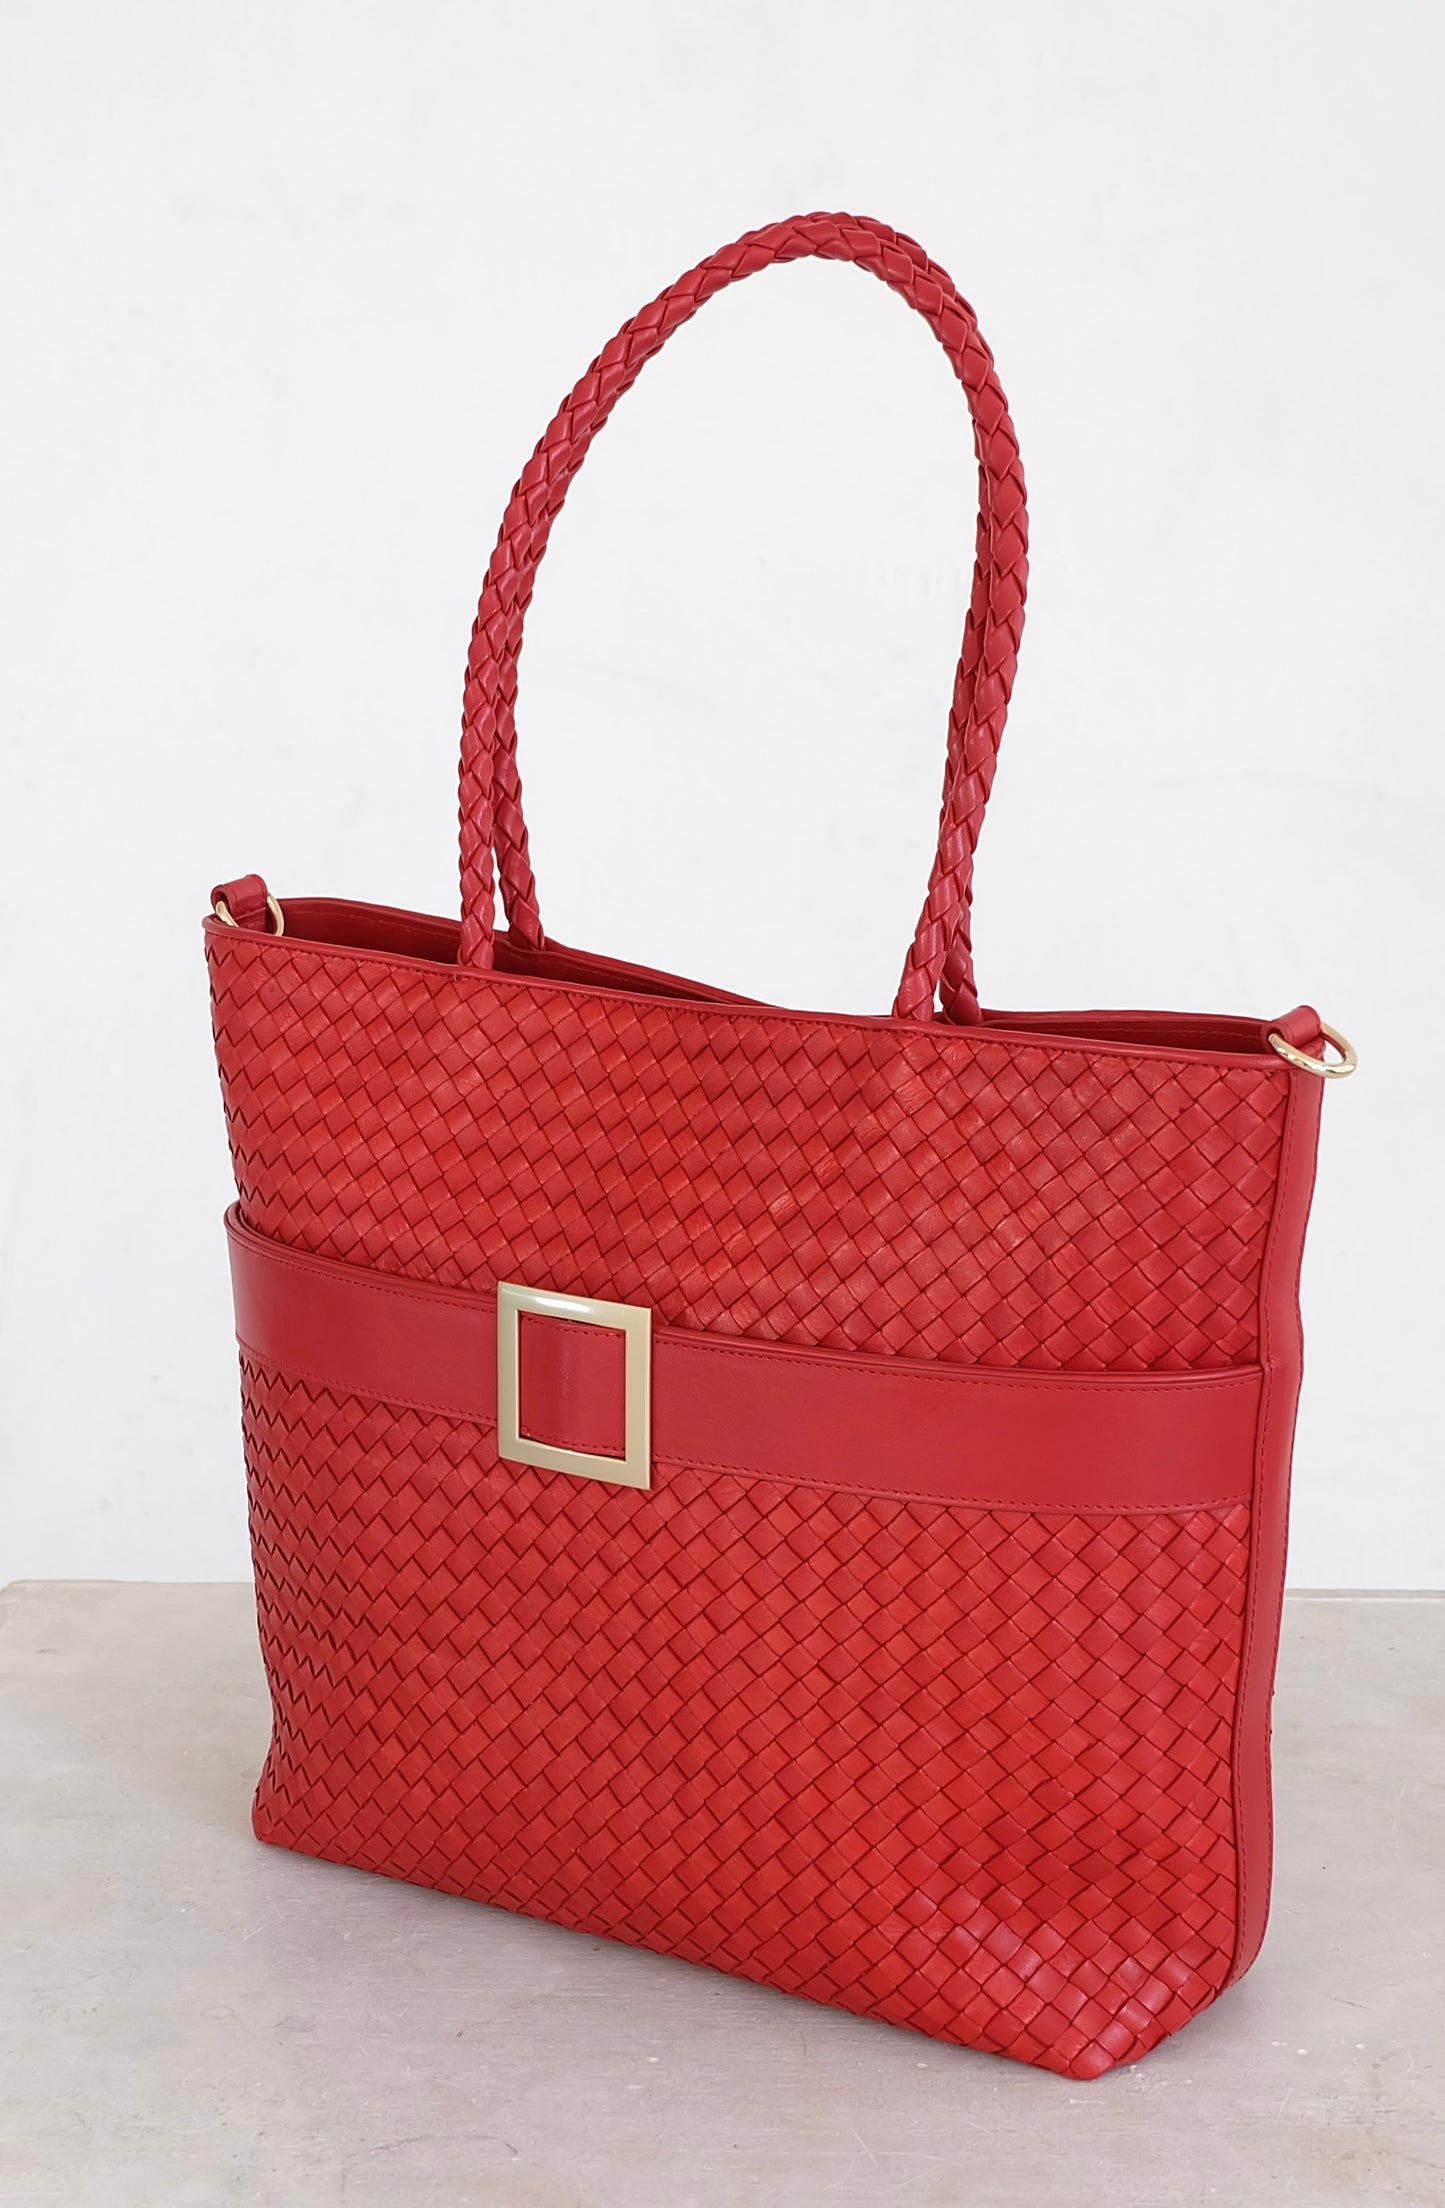 Sustainable Italian leather designer handbag, medium tote and crossbody in chili red. Handbag with accent buckle that is a functional work of art.